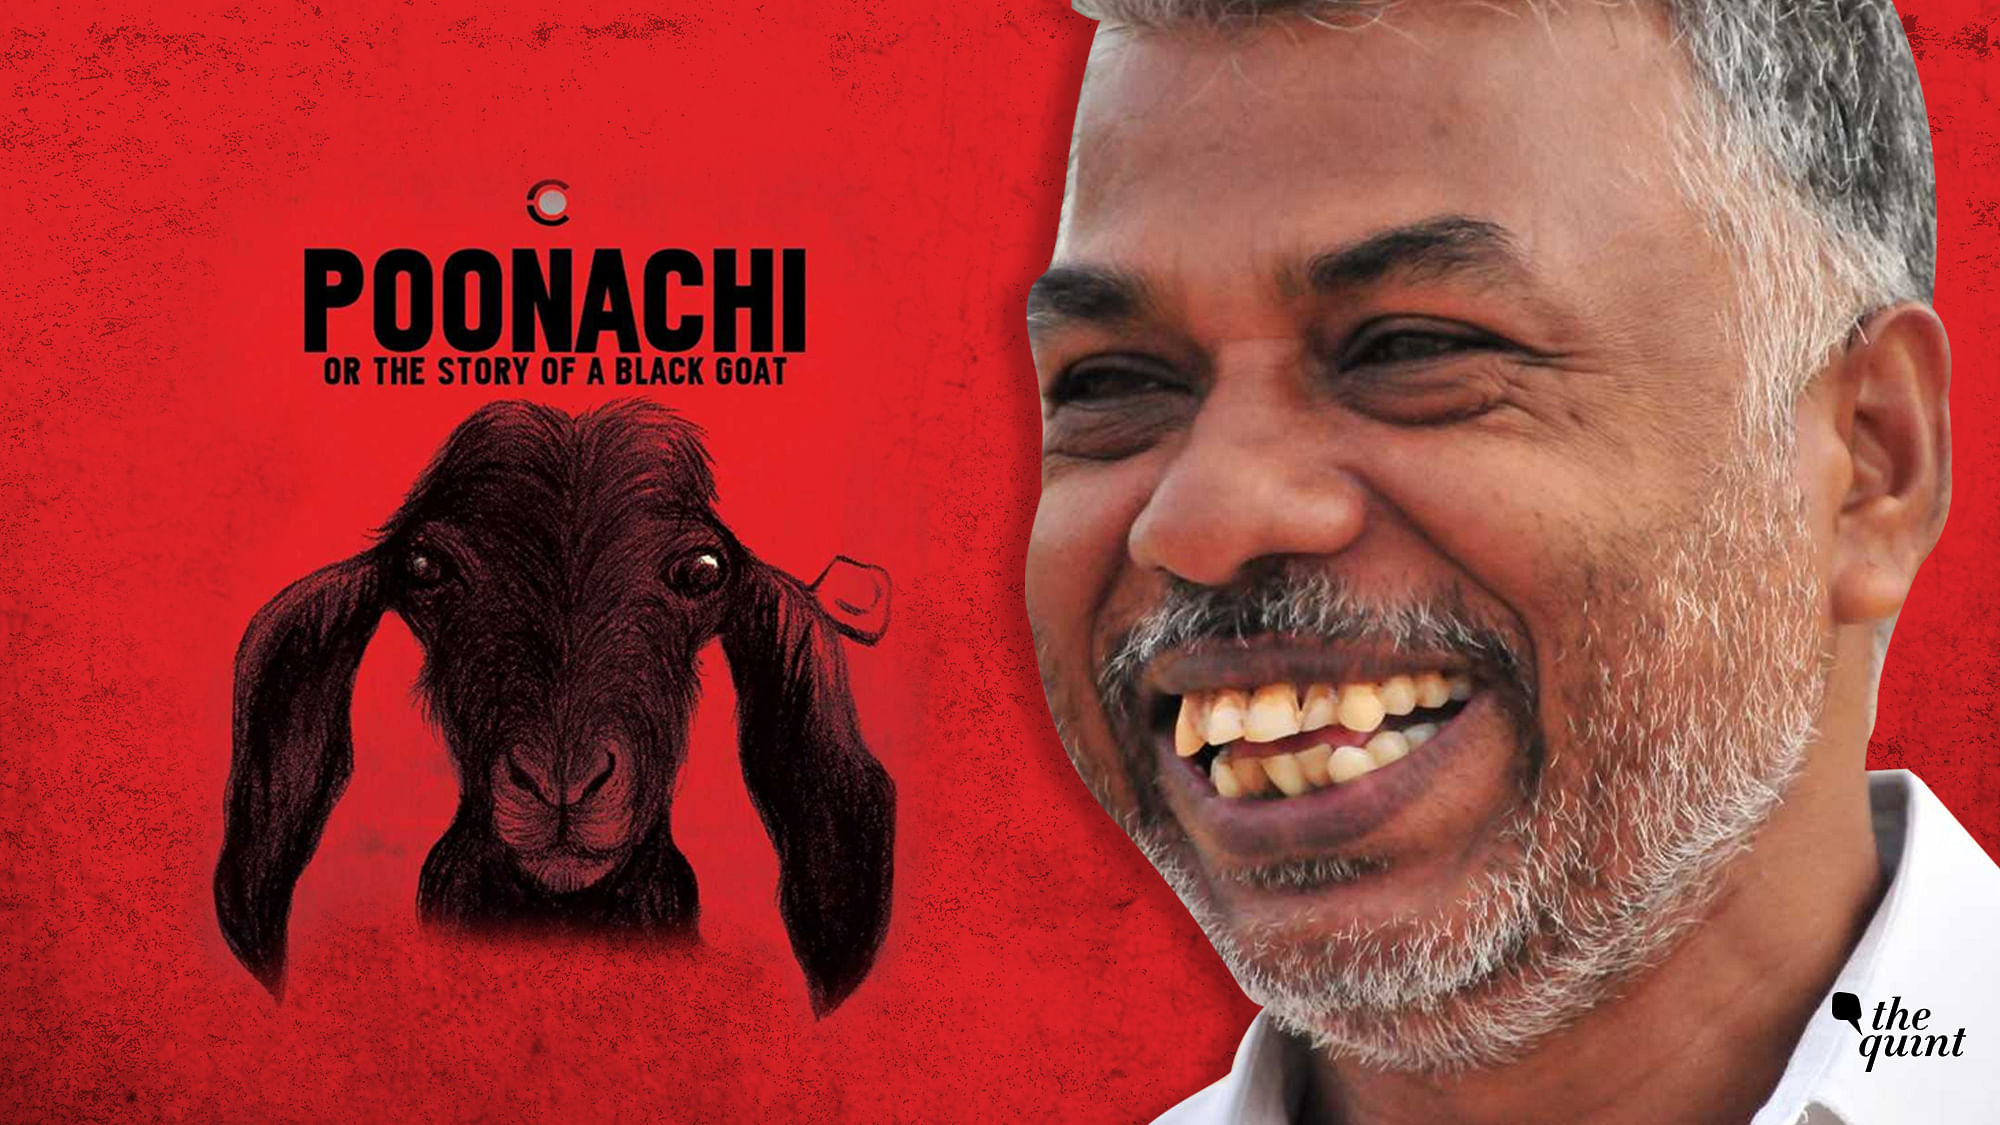 Perumal Murugan speaks to <b>The Quint</b> about his book <i>Poonachi, or the Story of a Black Goat</i>.&nbsp;